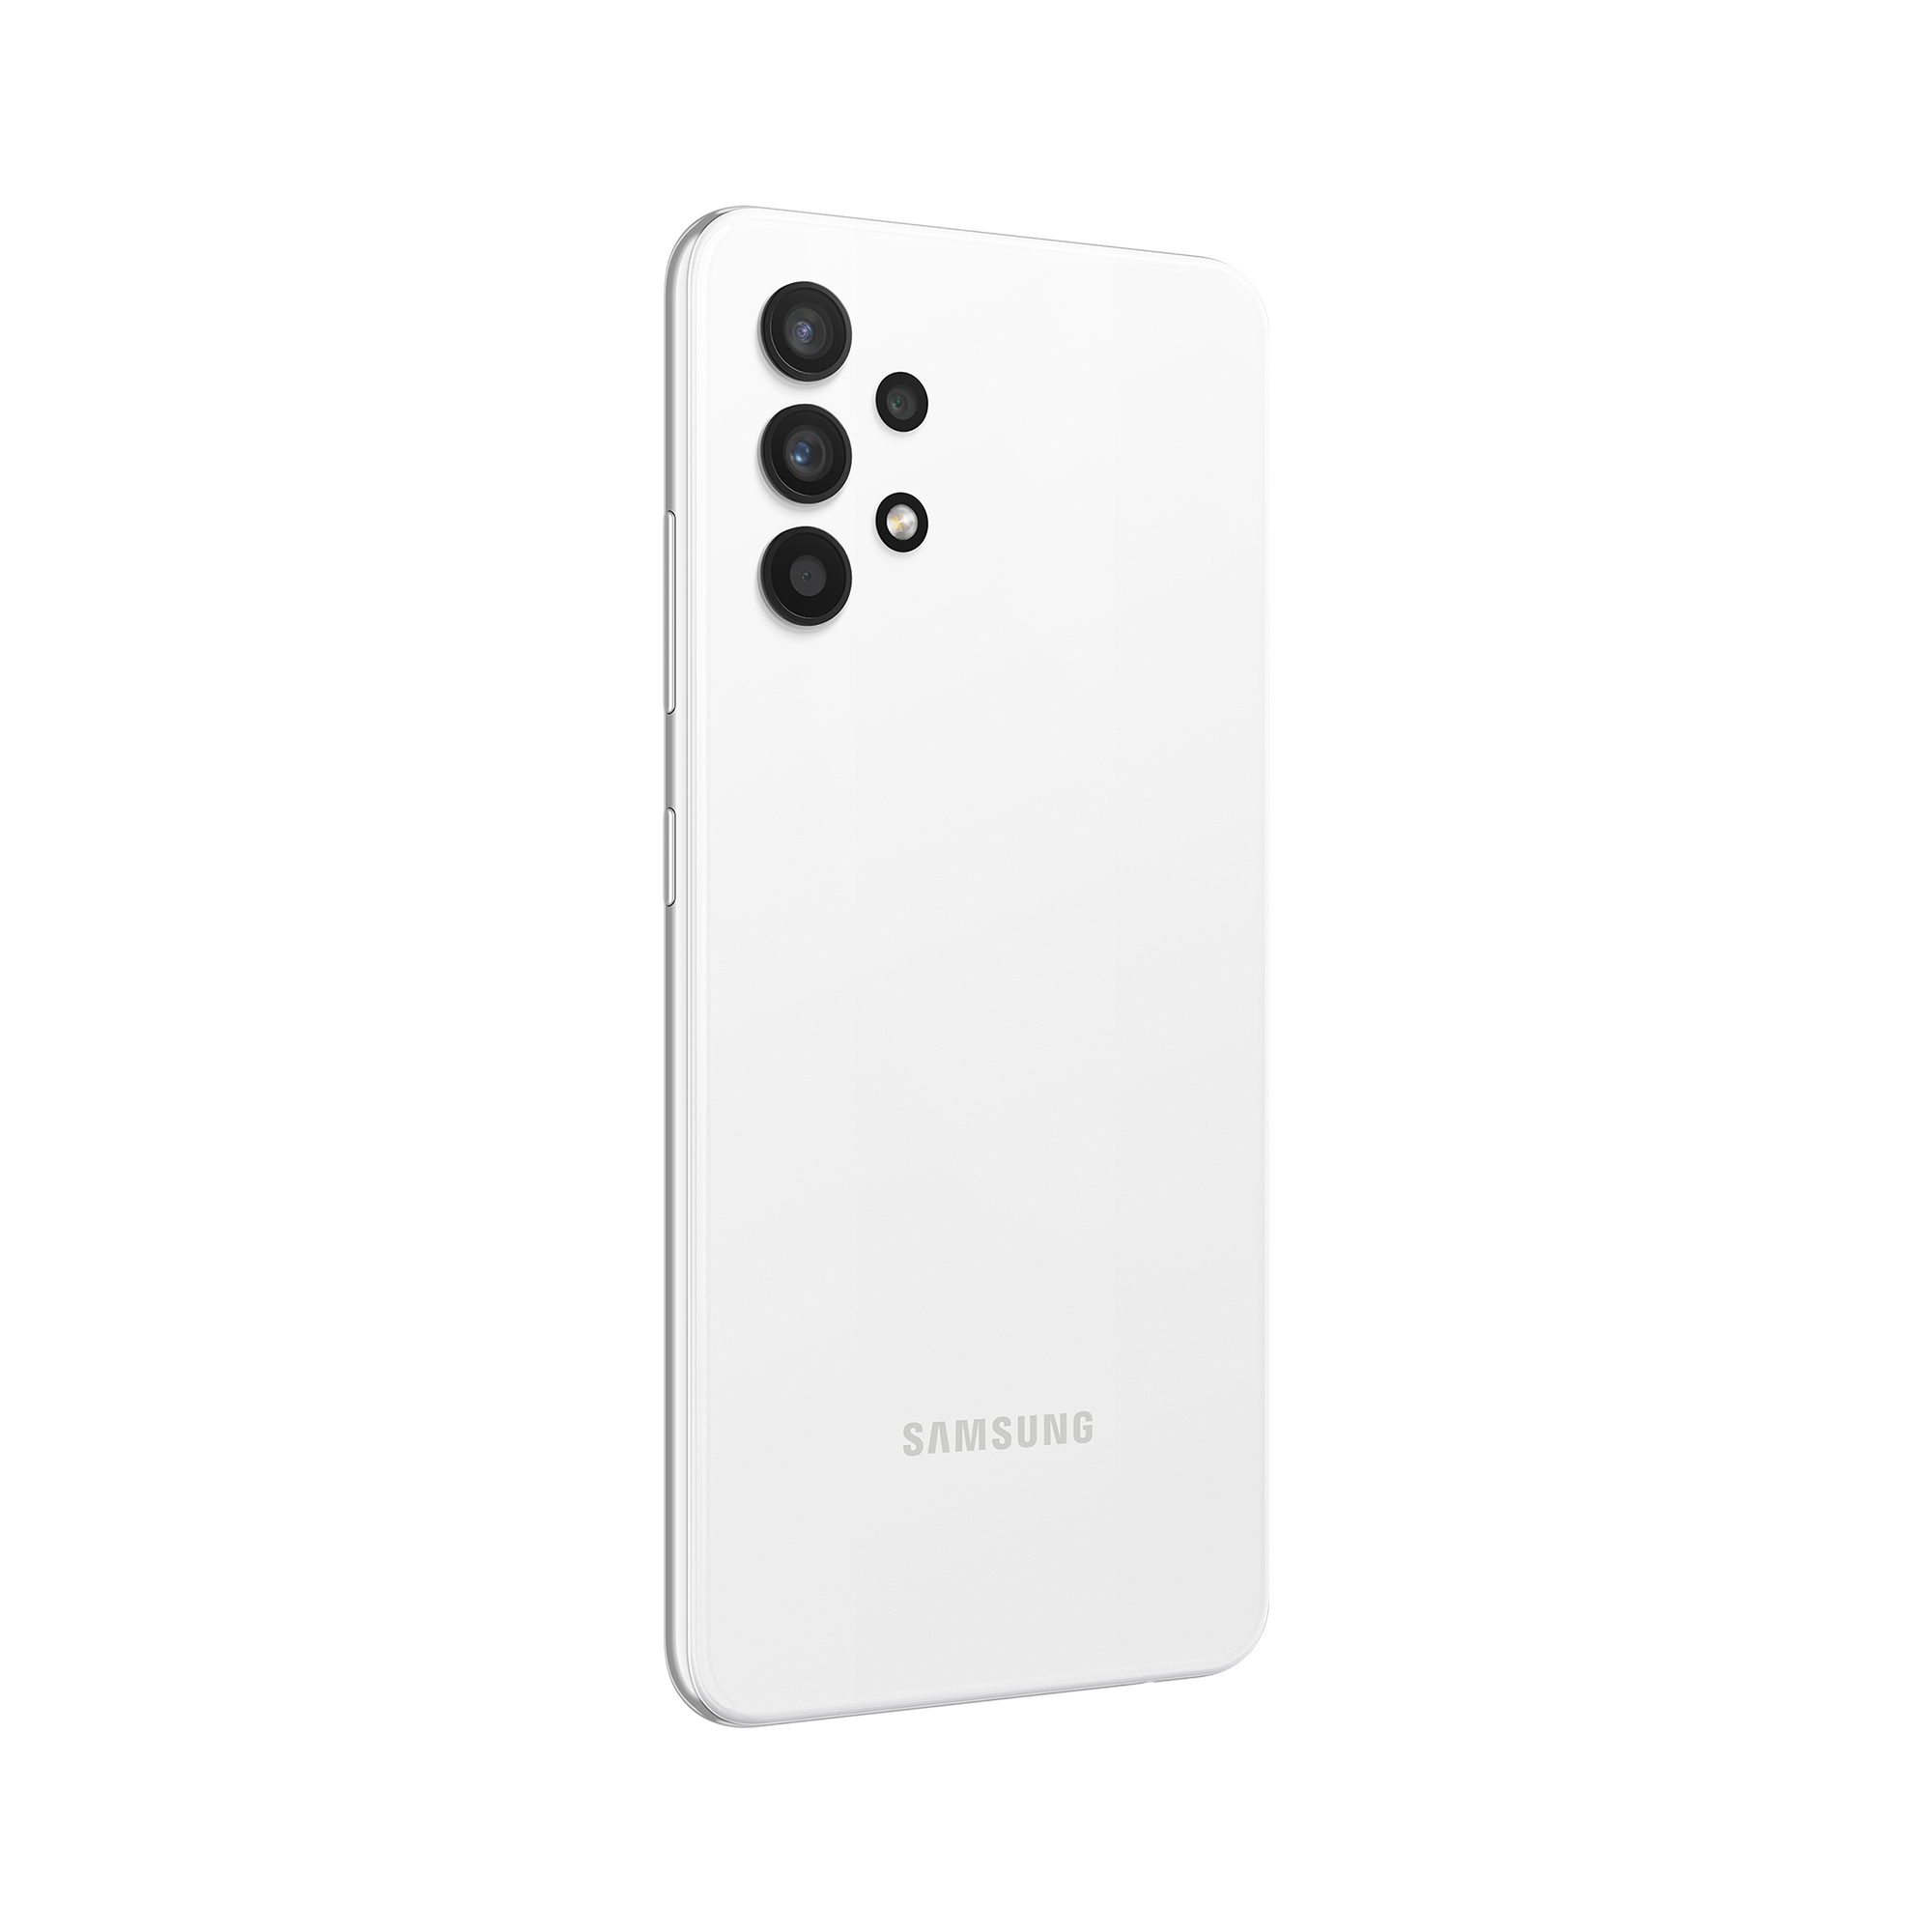 Samsung Galaxy A32 Awesome White Back Left